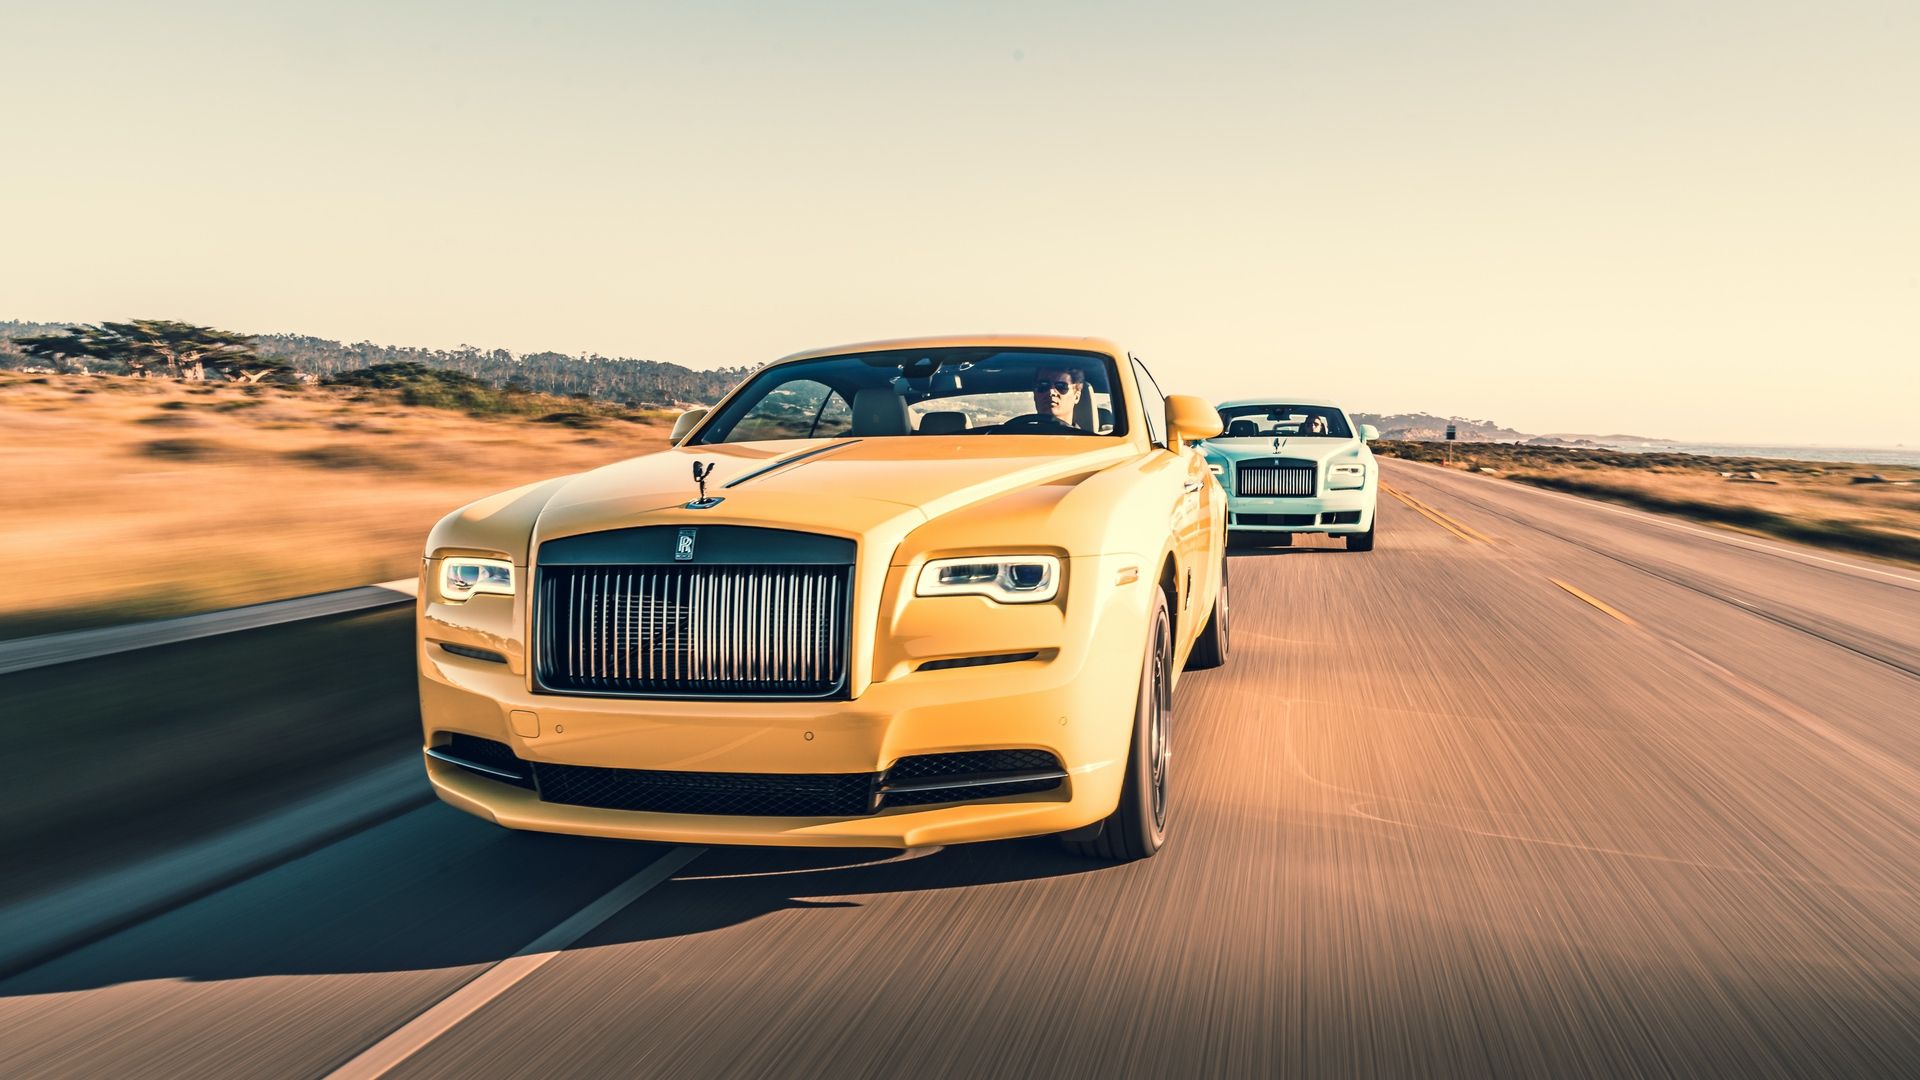 Rolls Royce Motor Cars Revealed The Pebble Beach 2019 Collection